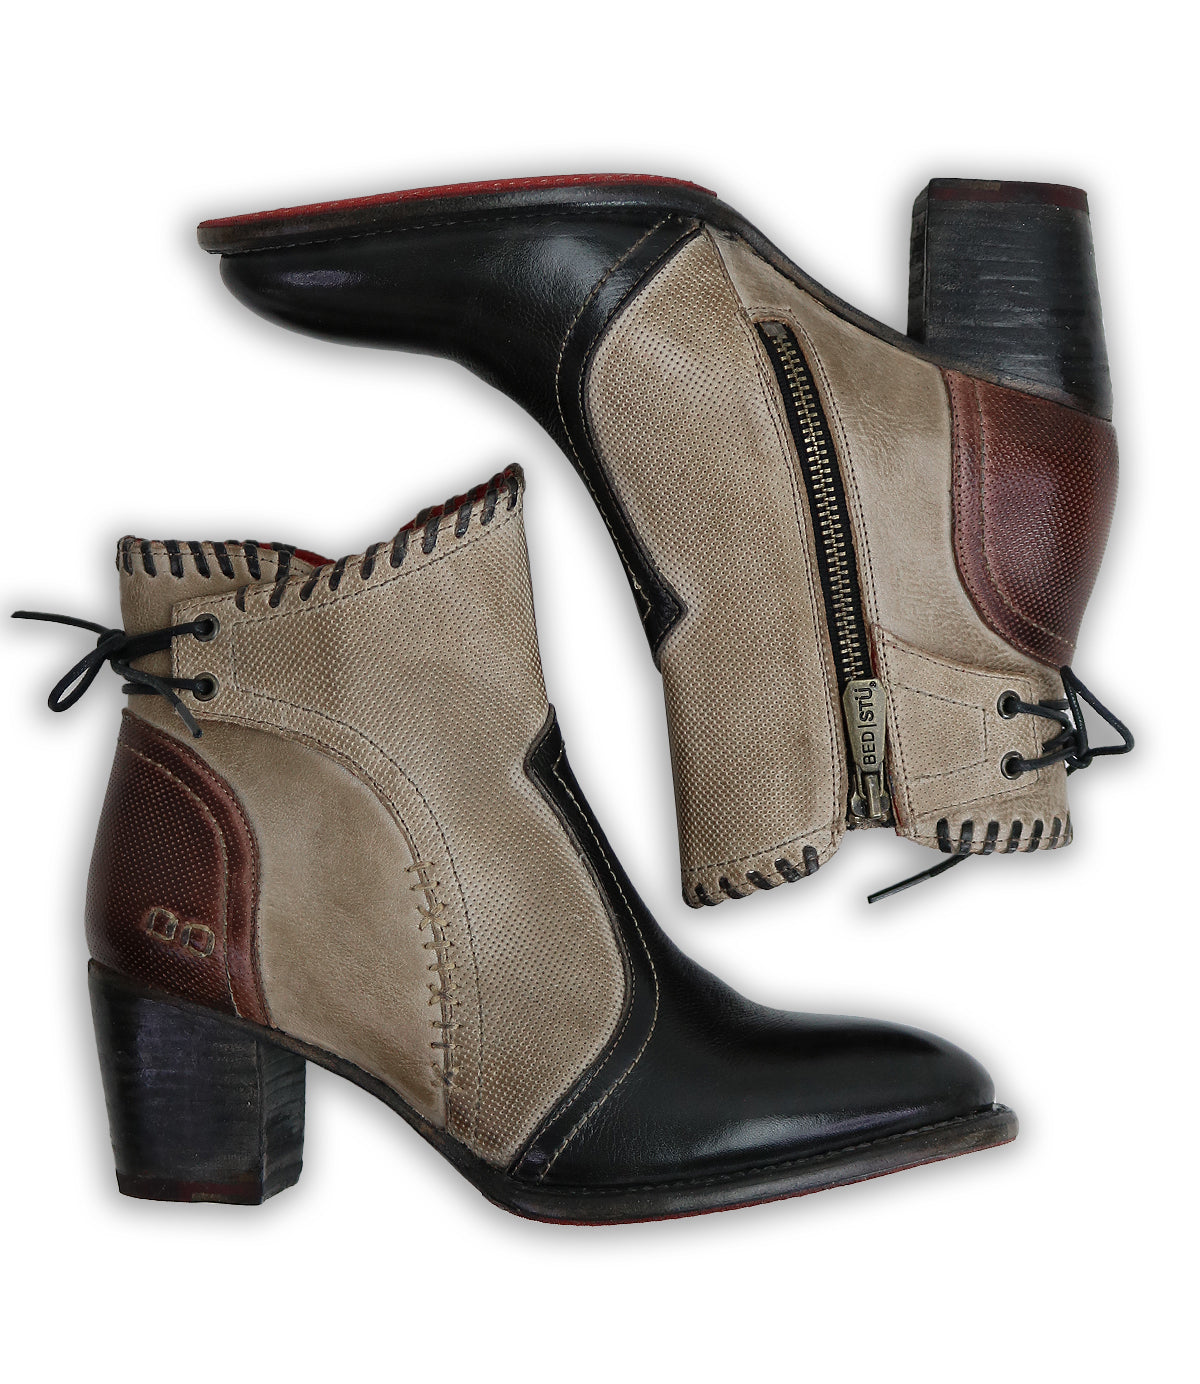 A pair of Bia ankle boots by Bed Stu with tan and black accents.